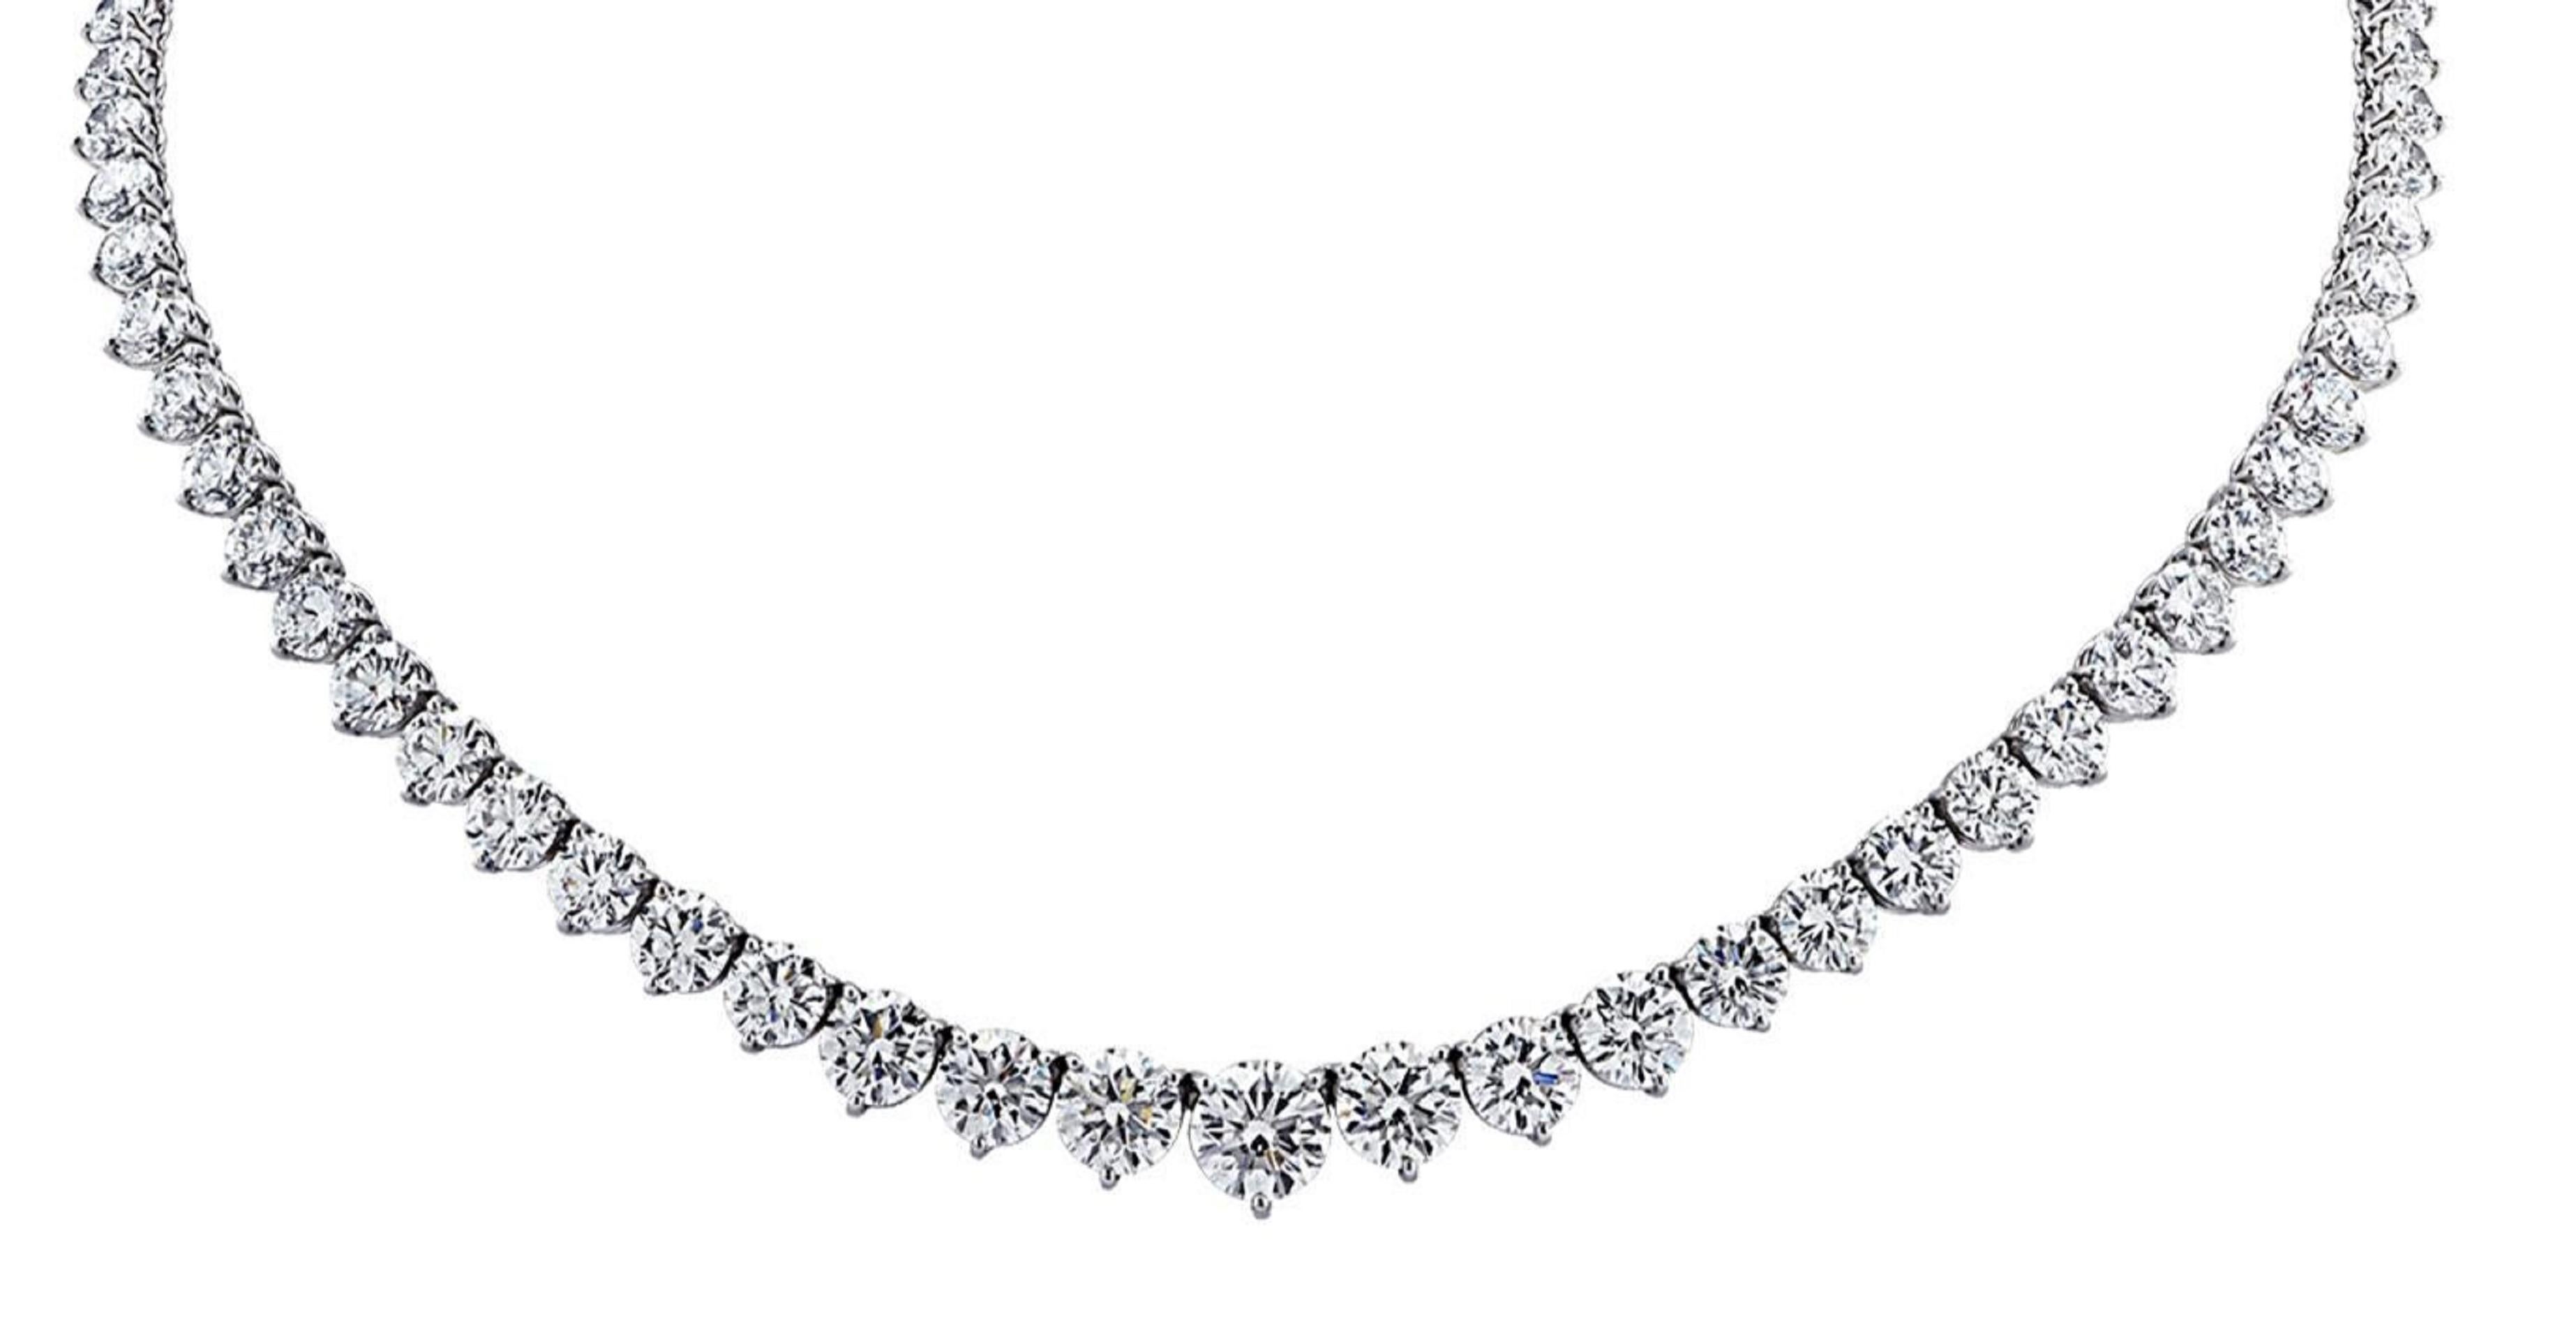 This stunning and impressive Riviera Necklace features substantial Diamond weight of 22 Carats in beautifully Round Brilliant Cut gems with a sparkly excellent cut

18k white gold graduated diamond riviera necklace. Mounted in the necklace are 111